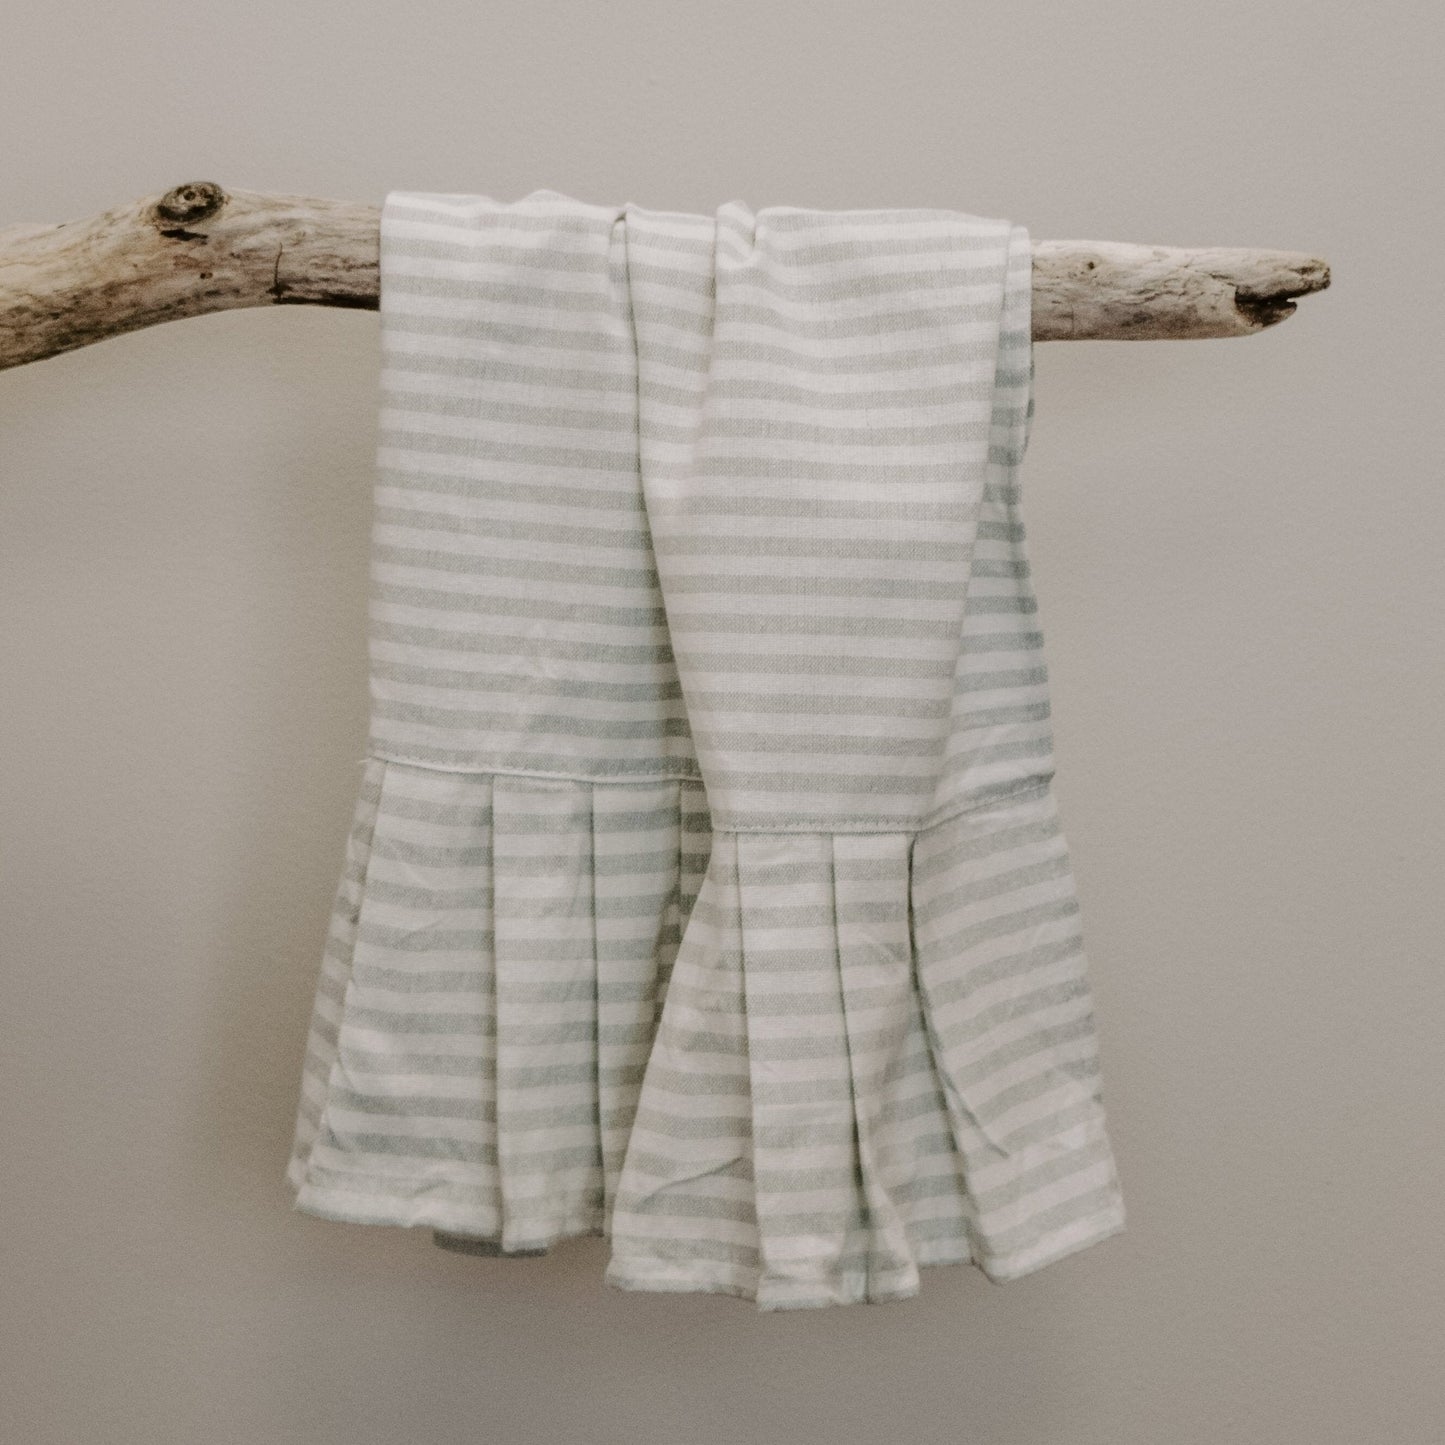 Grey Striped Tea Towel with Ruffle by Sweet Water Decor